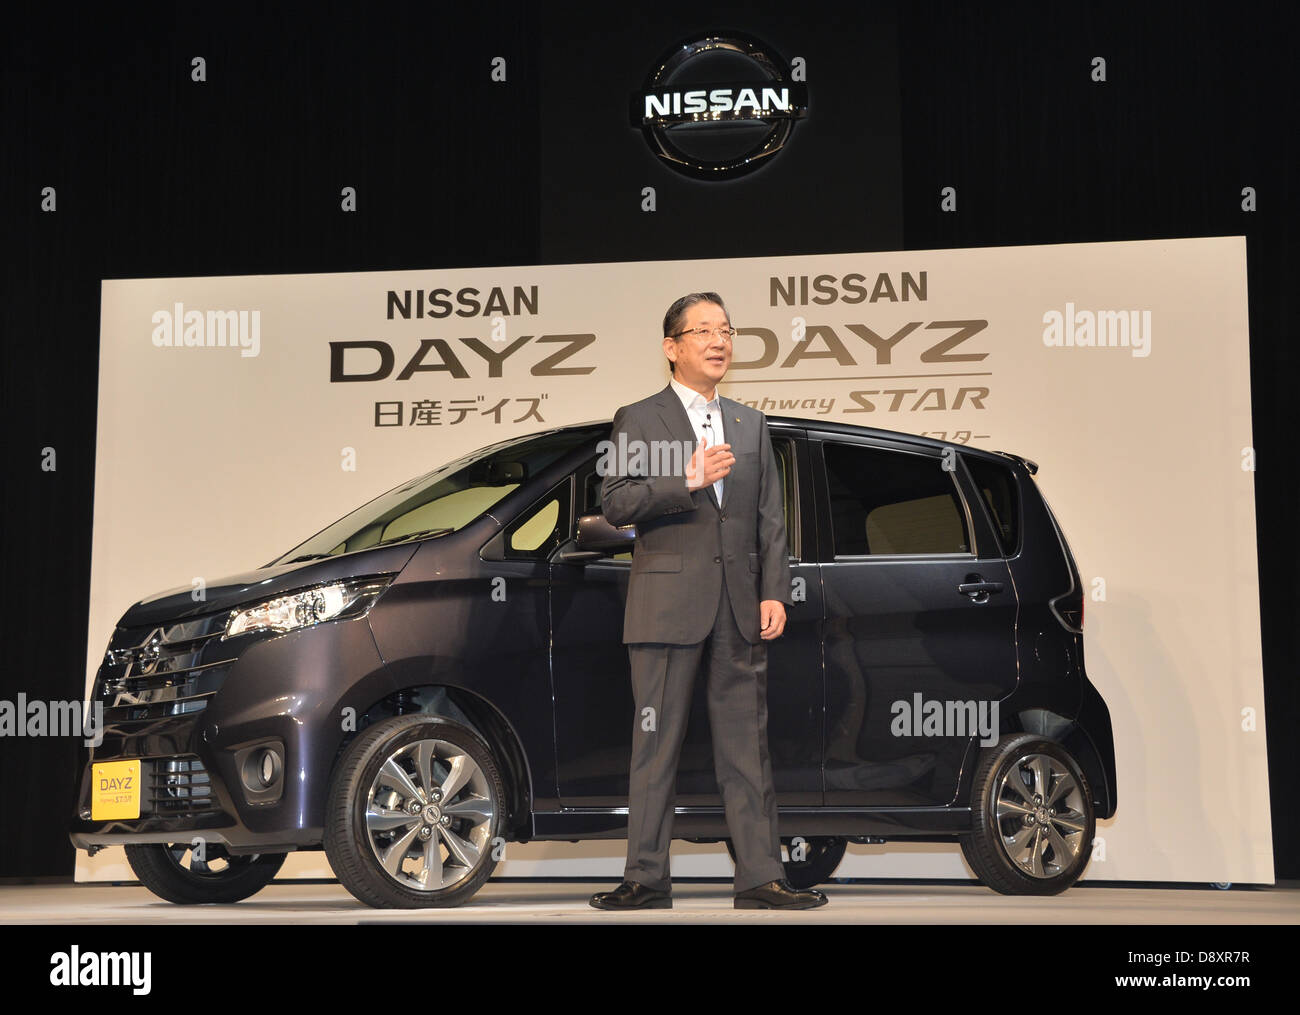 Tokyo, Japan. 6th June 2013. Nissan Motor Company unveiled a new mini-car 'Dayz' in Tokyo, Japan June 6, 2013. Nissan Chief Operating Officer (COO), Toshiyuki Shiga, showed the idea which aims to more than 10% domestic market share of mini-cars.  (Photo by Natsuki Sakai/AFLO/Alamy Live News) Stock Photo